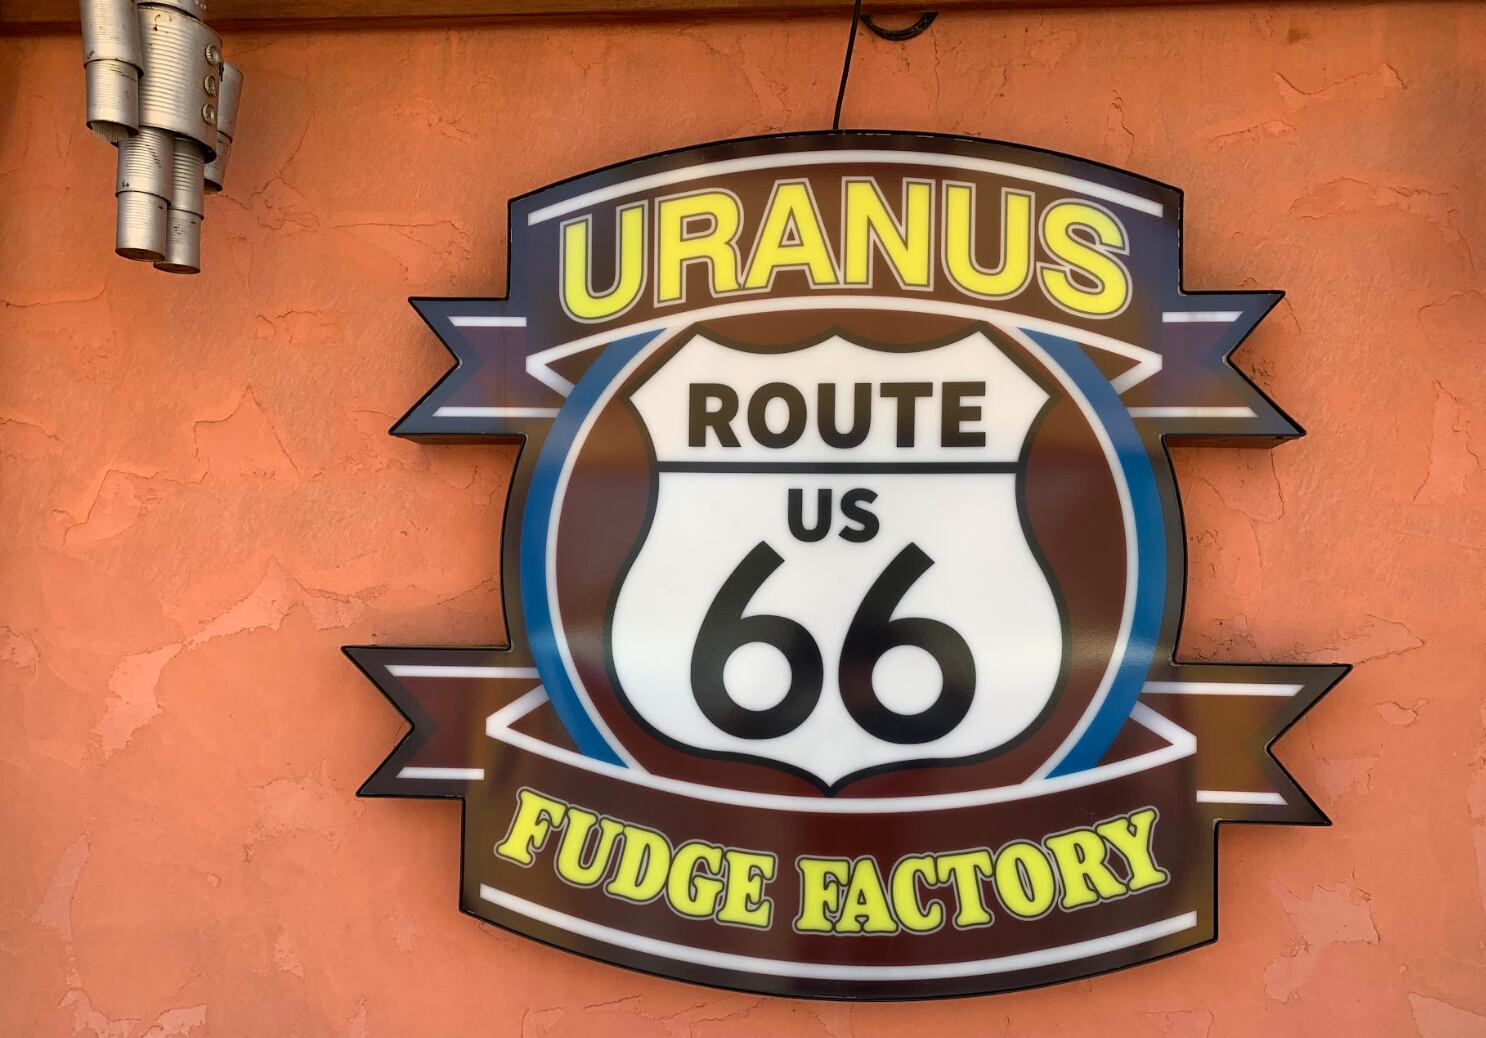 The Uranus Fudge Factory And General Store, located along Route 66 in Uranus, Mo, provides plenty of puns and bawdy laughs.